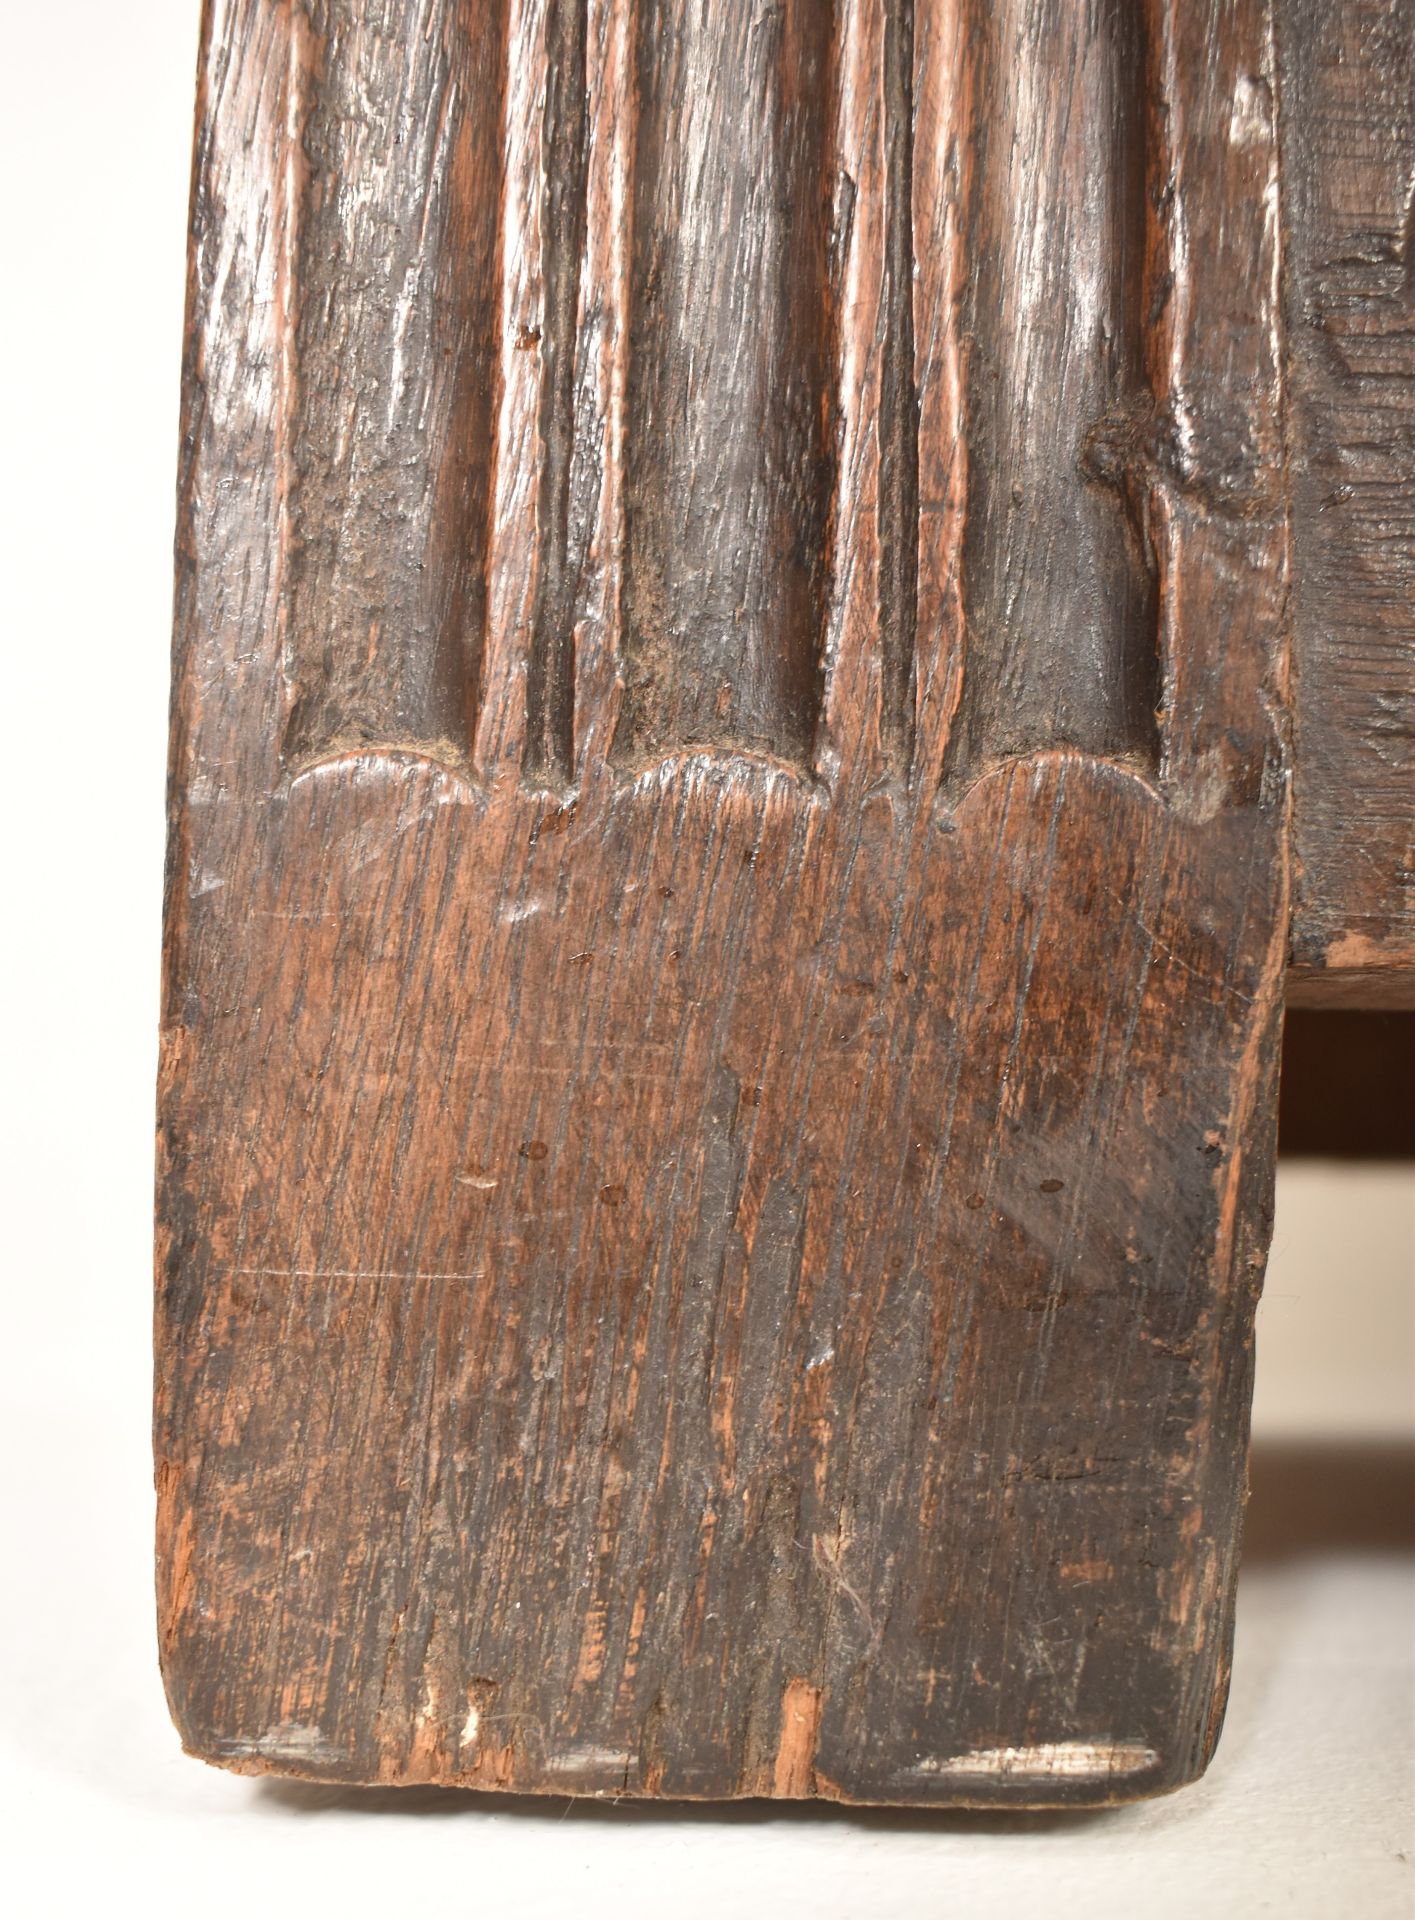 ELIZABETHAN STYLE 19TH CENTURY CARVED OAK COURT CUPBOARD - Image 6 of 7